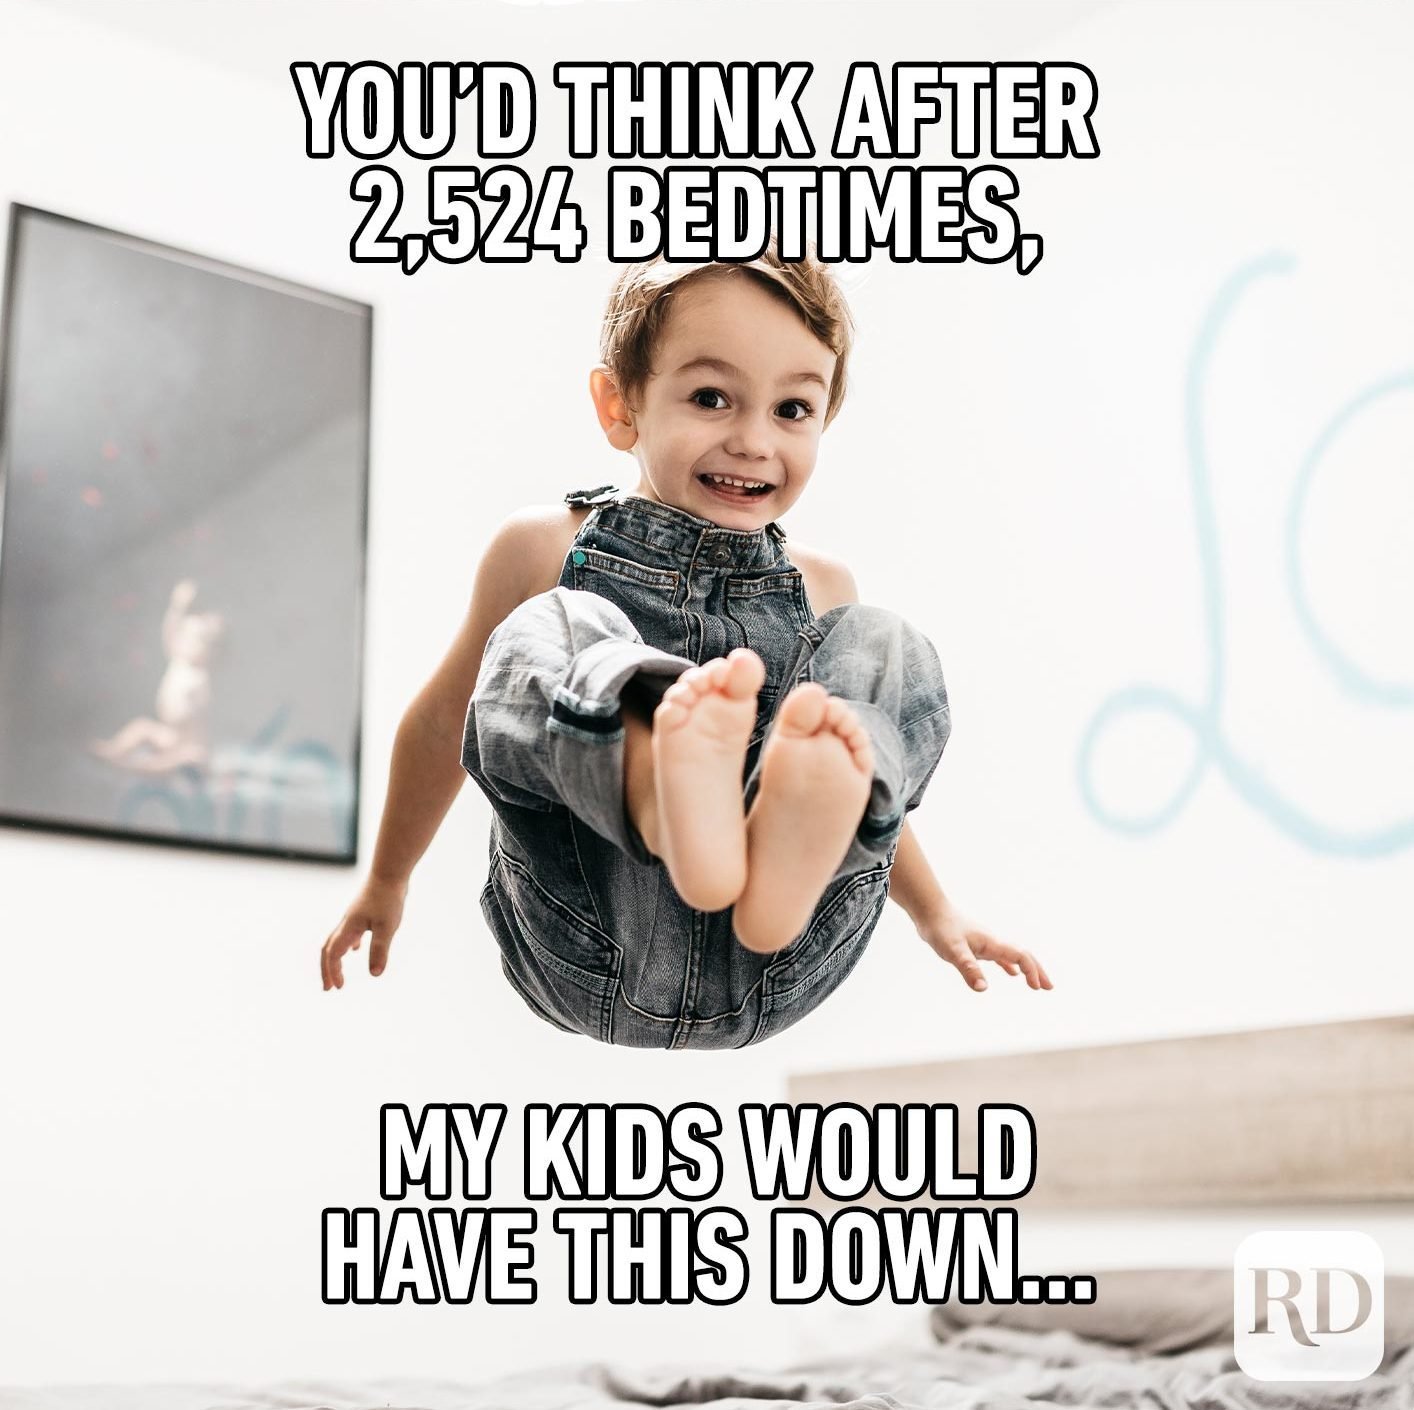 Child jumping on bed. MEME TEXT: You’d think after 2,524 bedtimes, my kids would have this down.